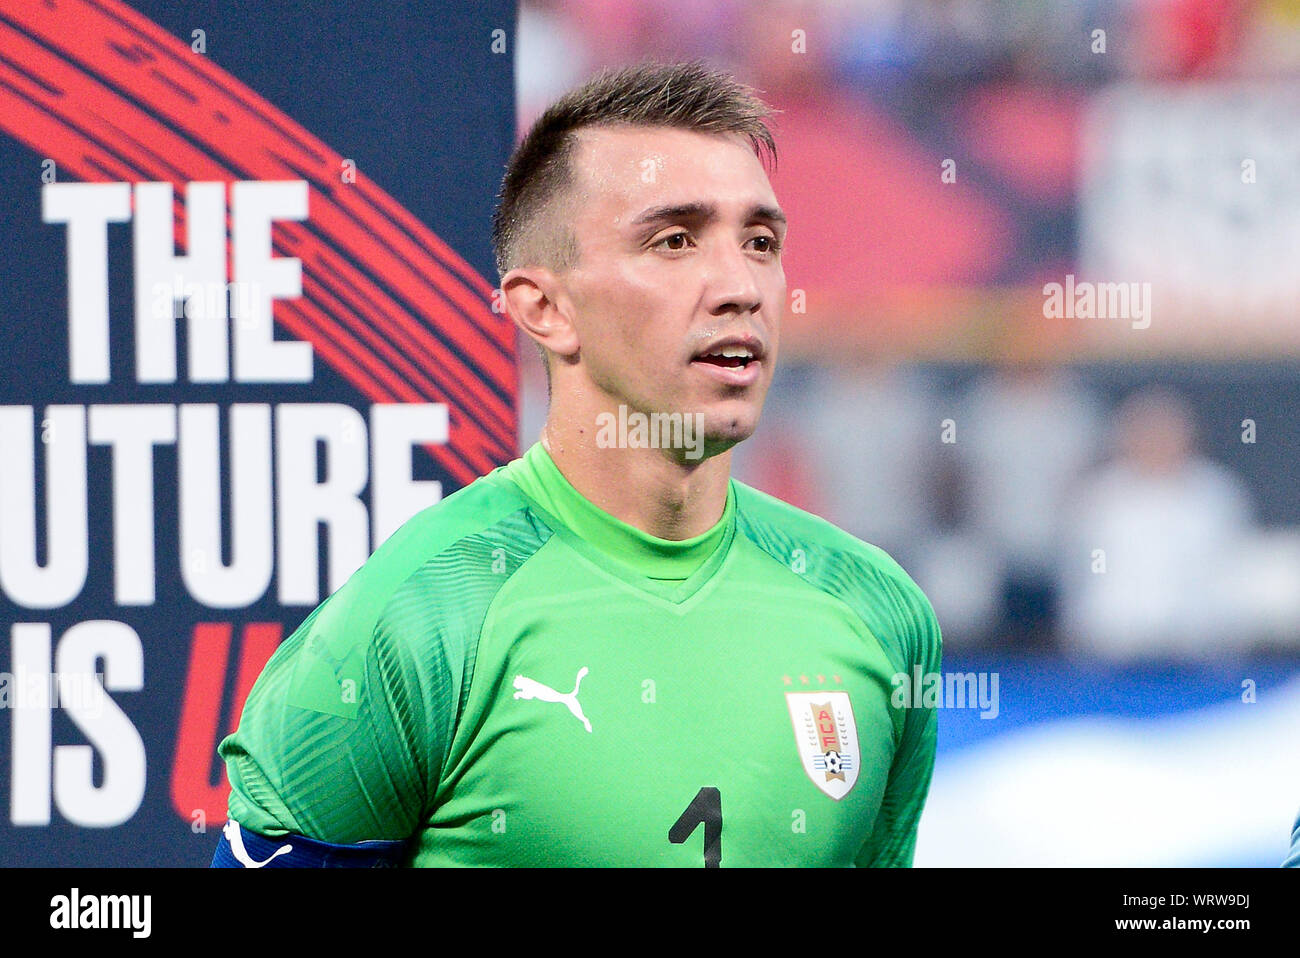 St. Louis, Missouri, USA. 10th Sep, 2019. Uruguay goalkeeper Fernando Muslera (1) during the final match before the Concacaf Nations League as the United States Men's National Team hosted Uruguay at Busch Stadium in St. Louis City, MO Ulreich/CSM/Alamy Live News Stock Photo